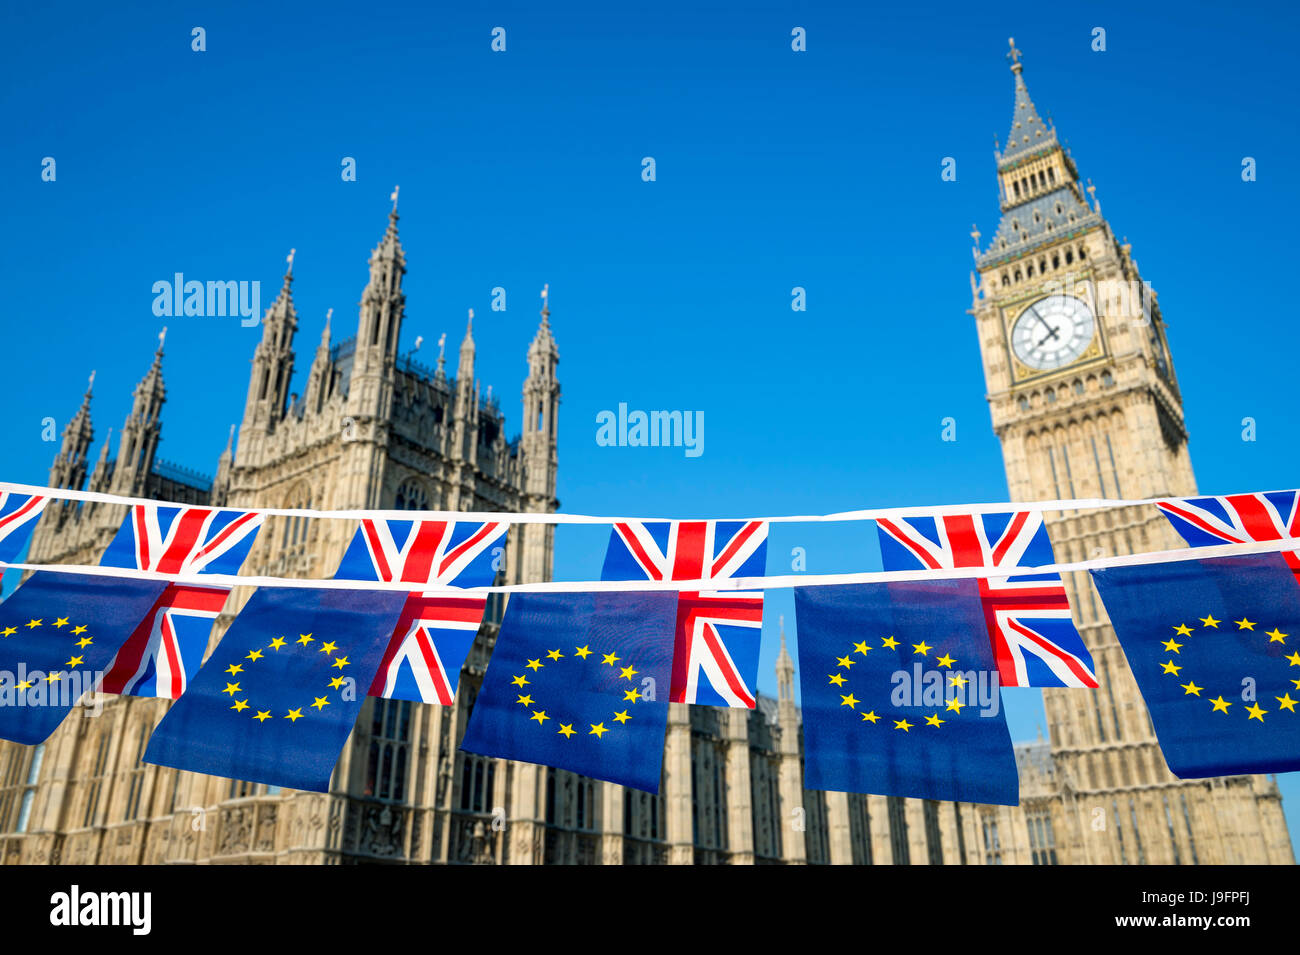 European Union and United Kingdom flag Brexit bunting hanging together in front of Big Ben and the Houses of Parliament at Westminster Palace Stock Photo